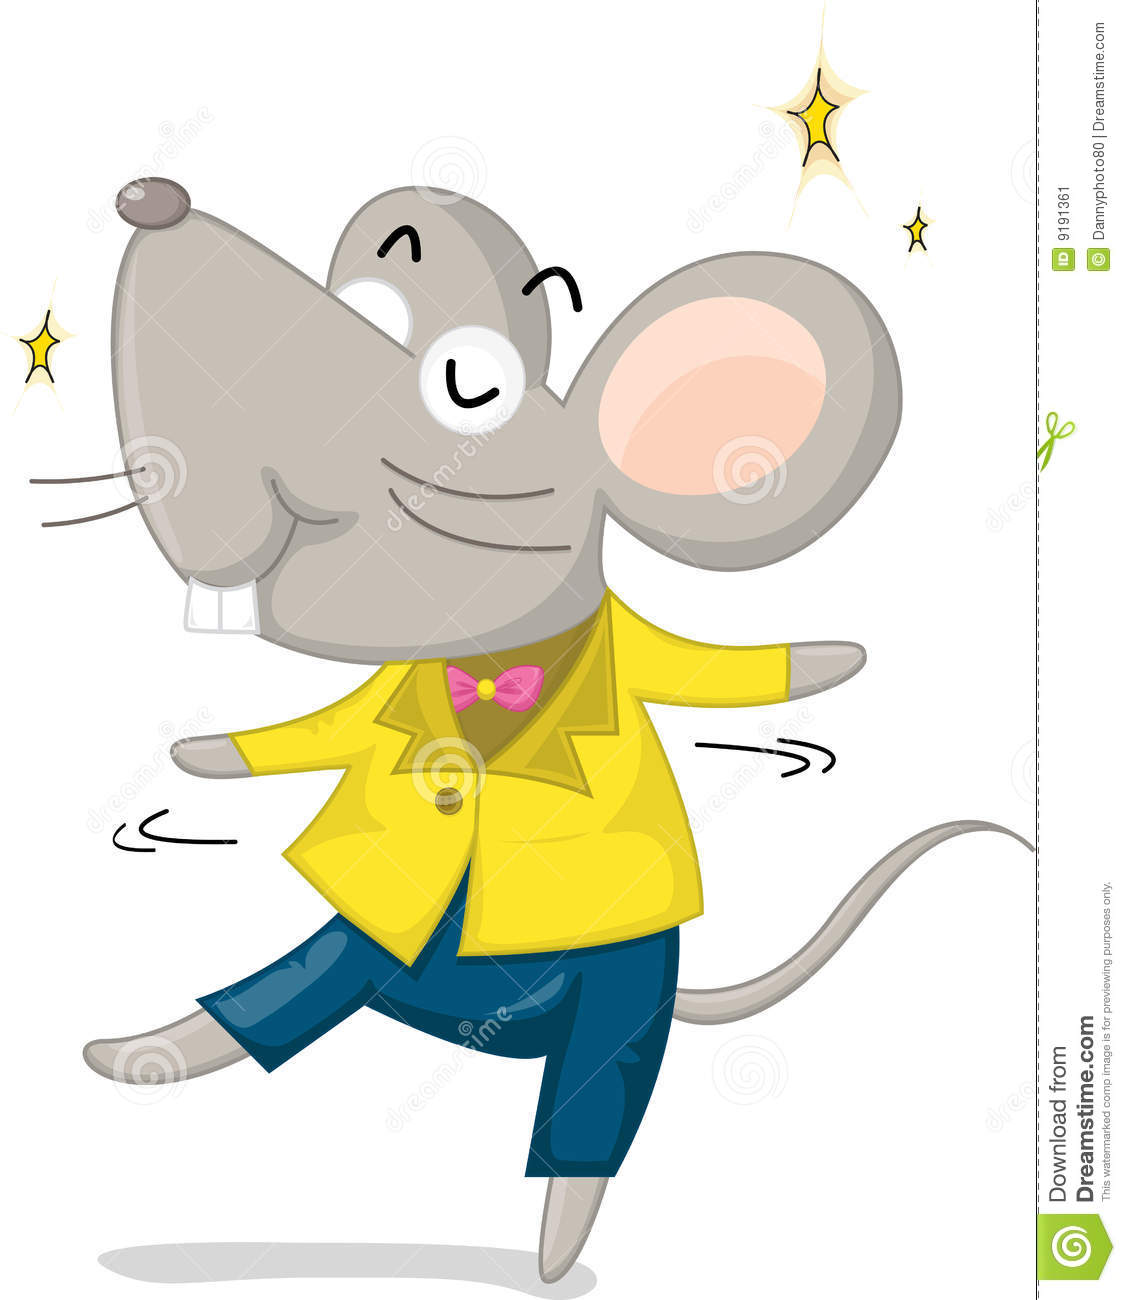 Dancing Mouse Stock Image   Image  9191361